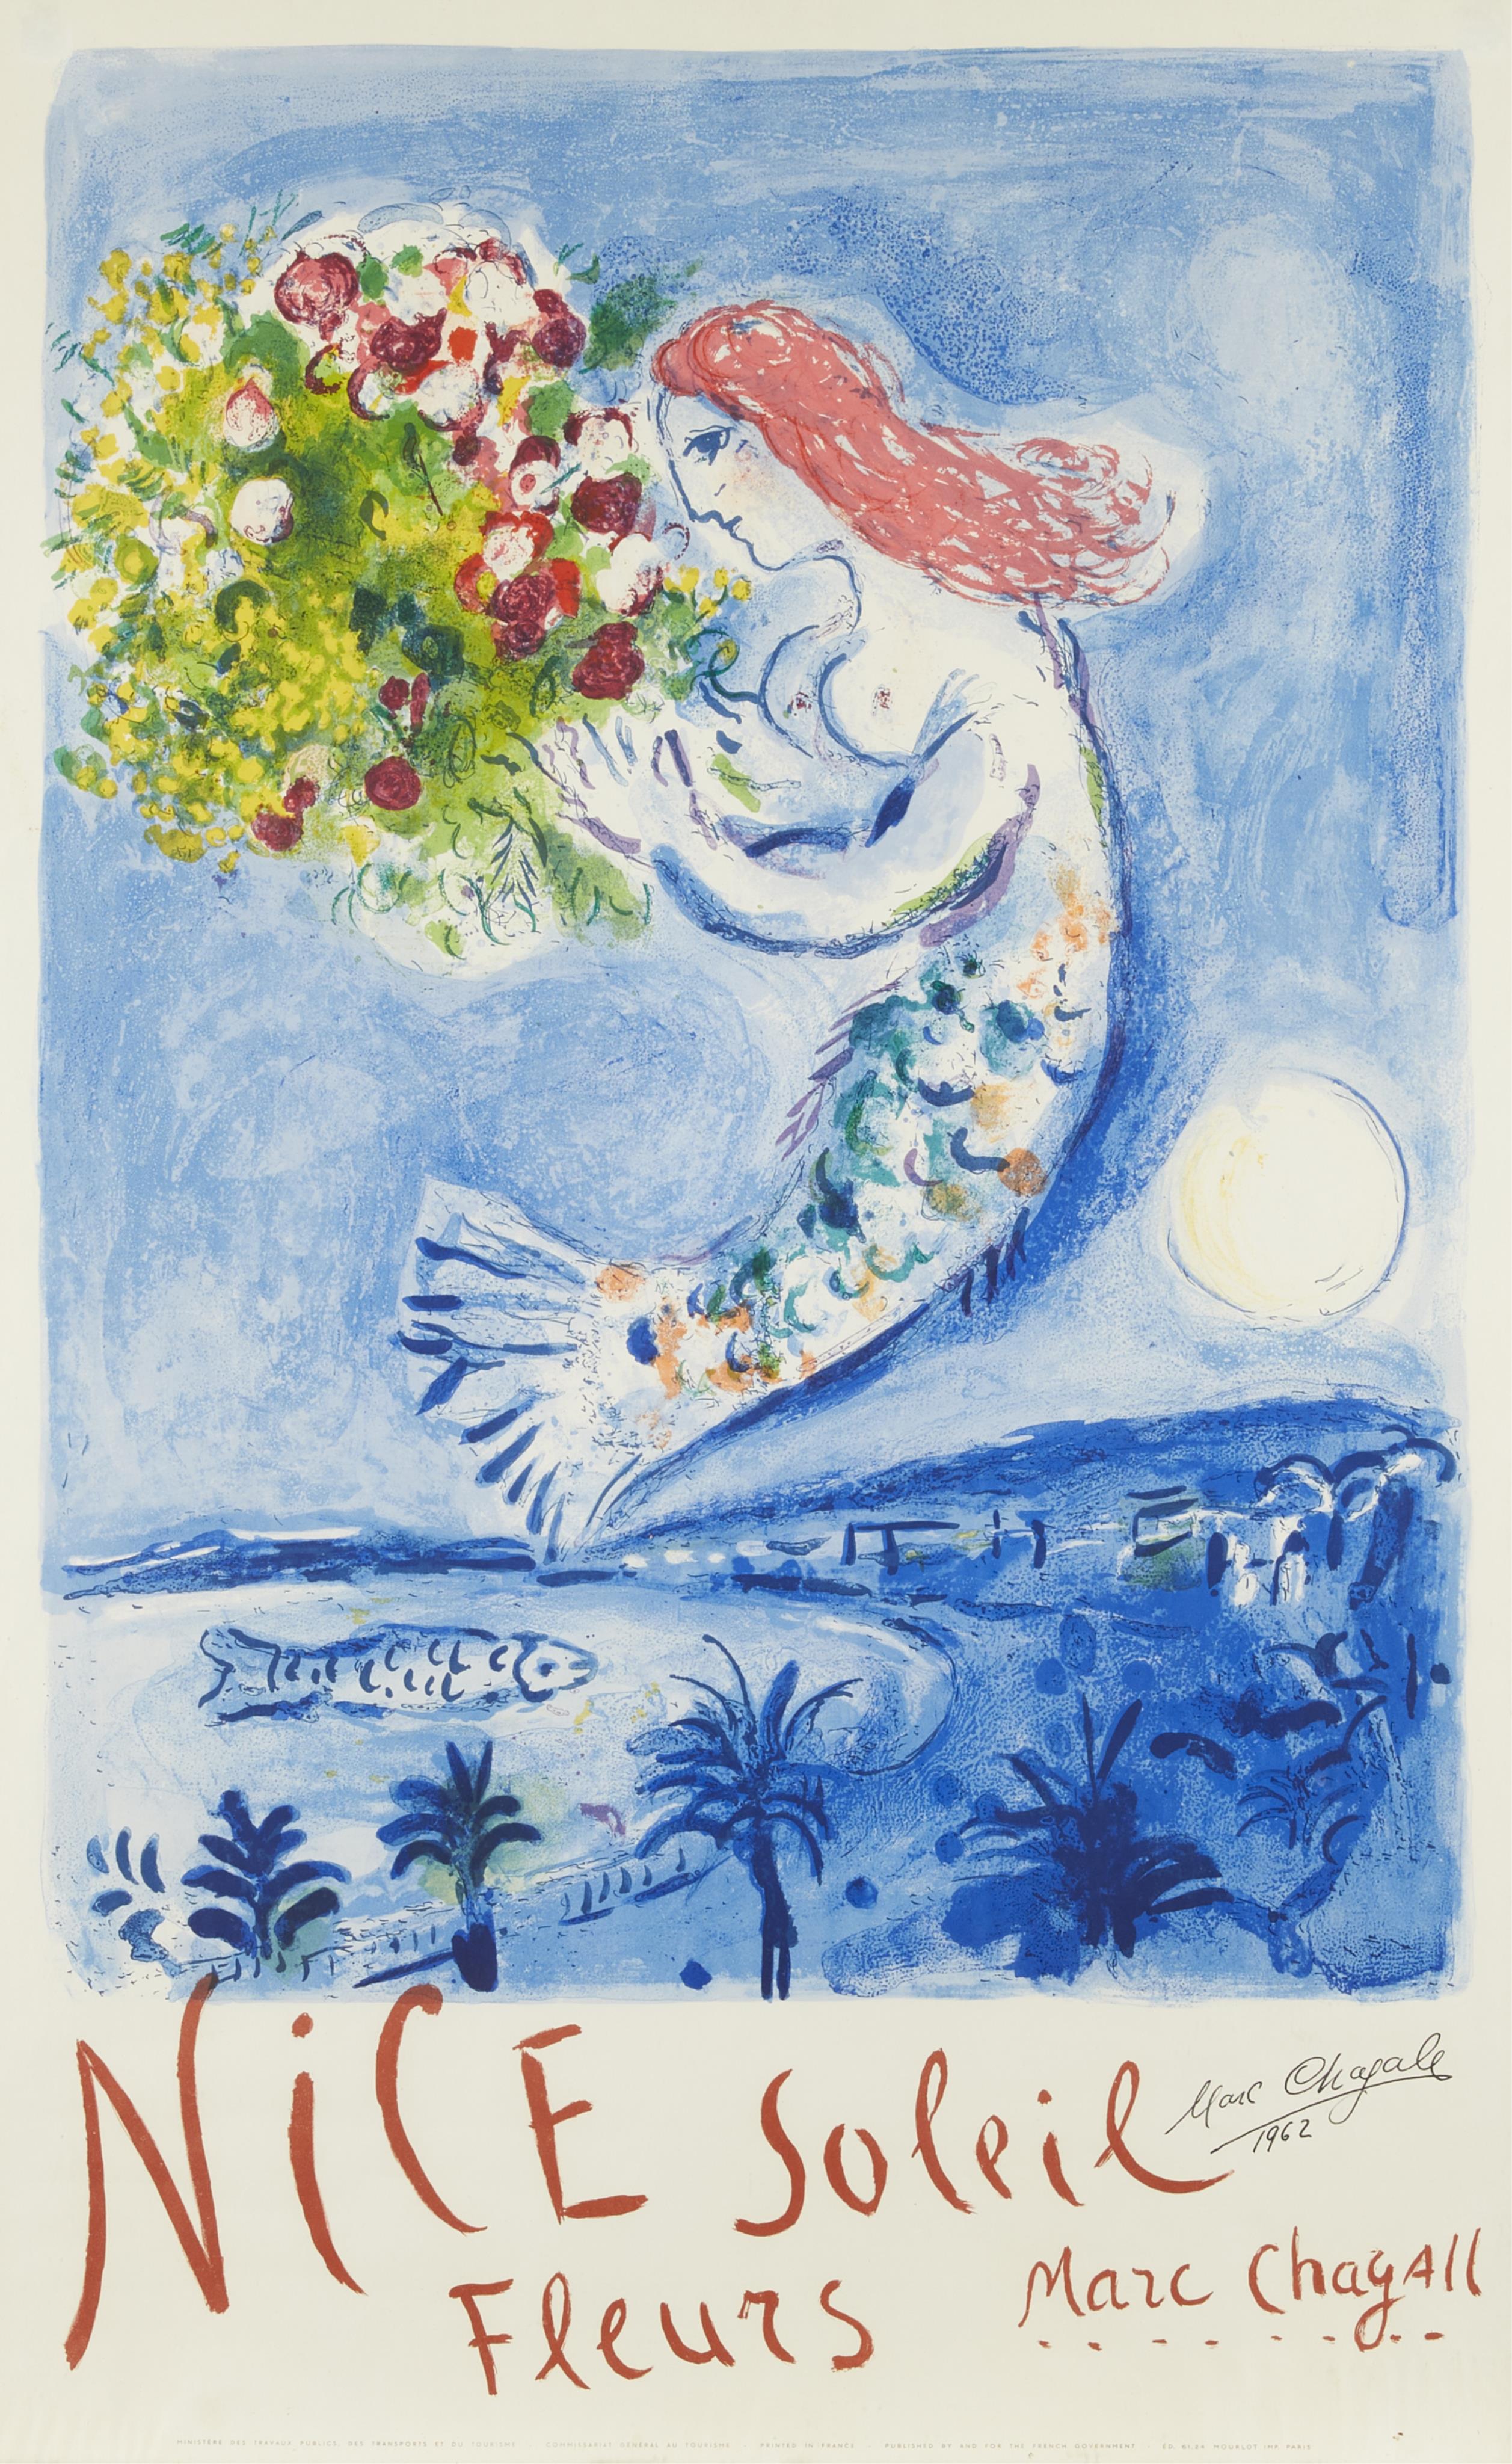 Marc Chagall "Bay of Angels" Signed Poster 1962